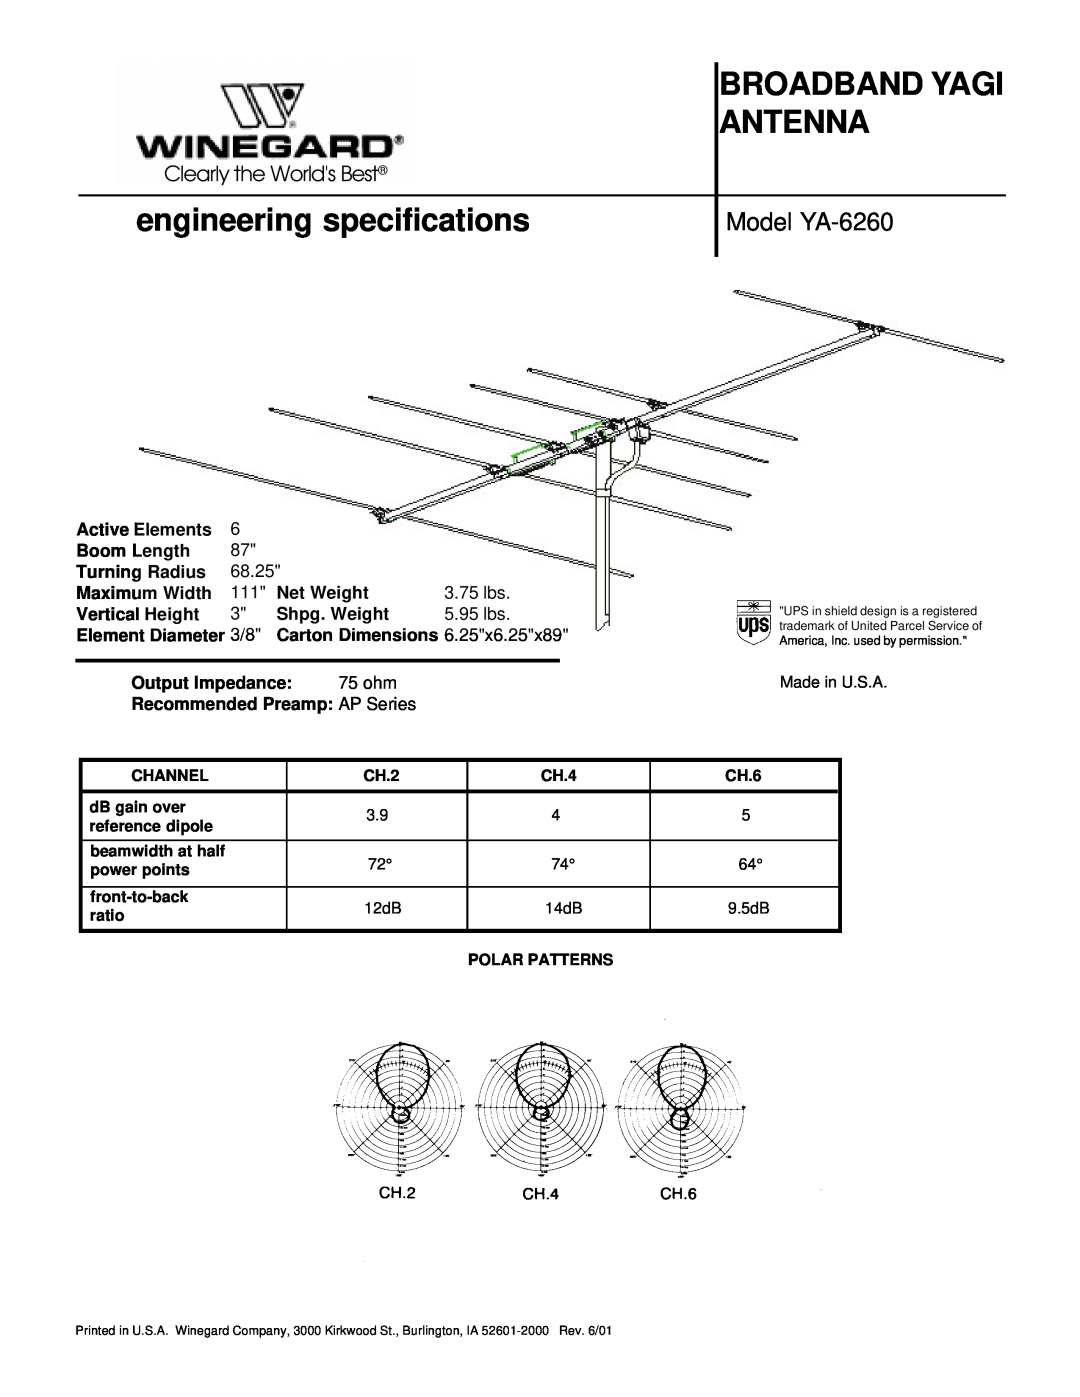 Winegard specifications Broadband Yagi Antenna, engineering specifications, Model YA-6260, Clearly the Worlds Best 